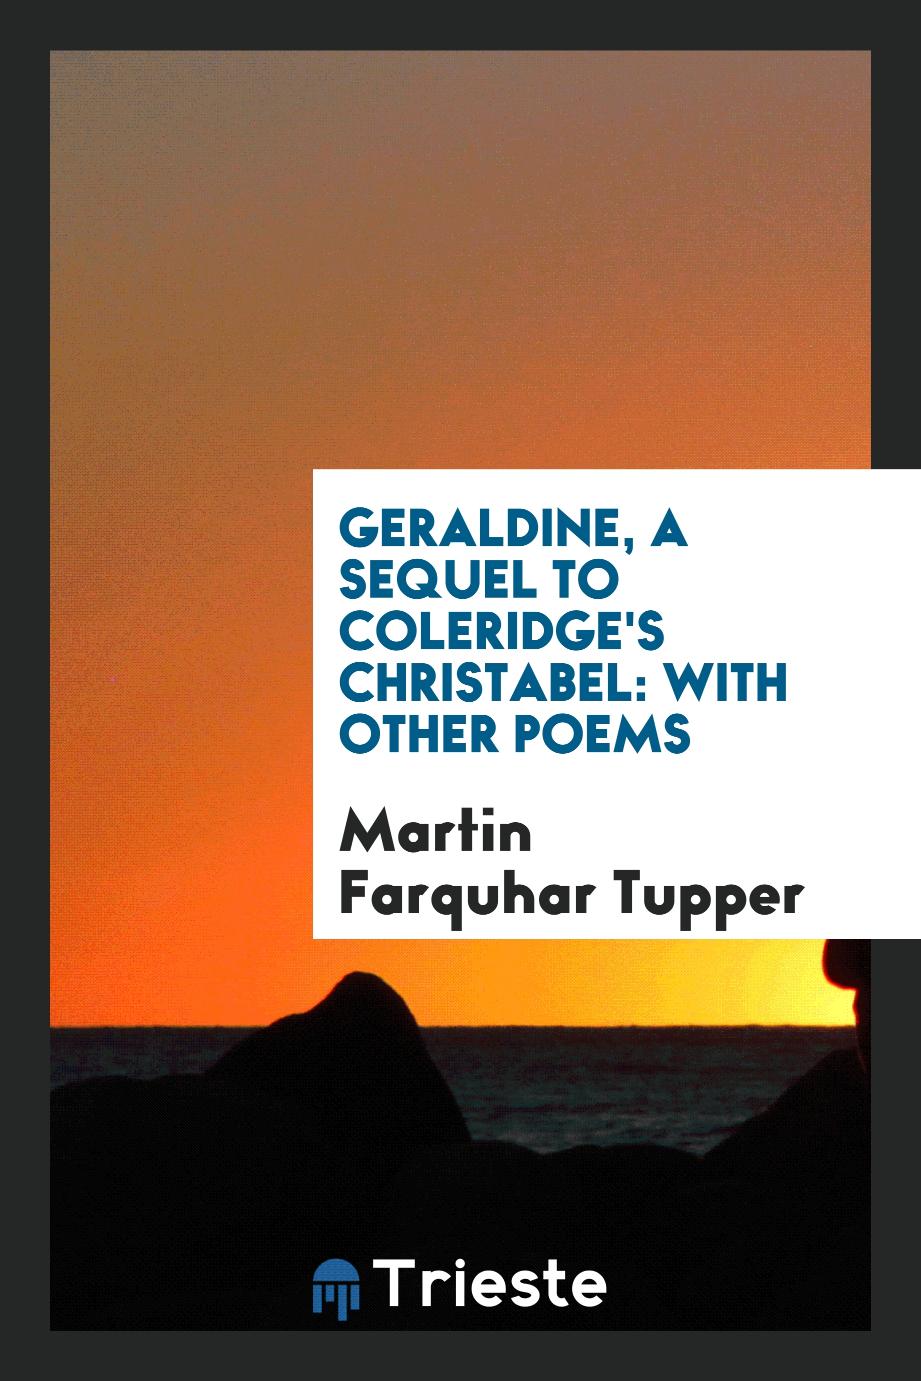 Geraldine, a sequel to Coleridge's Christabel: with other poems